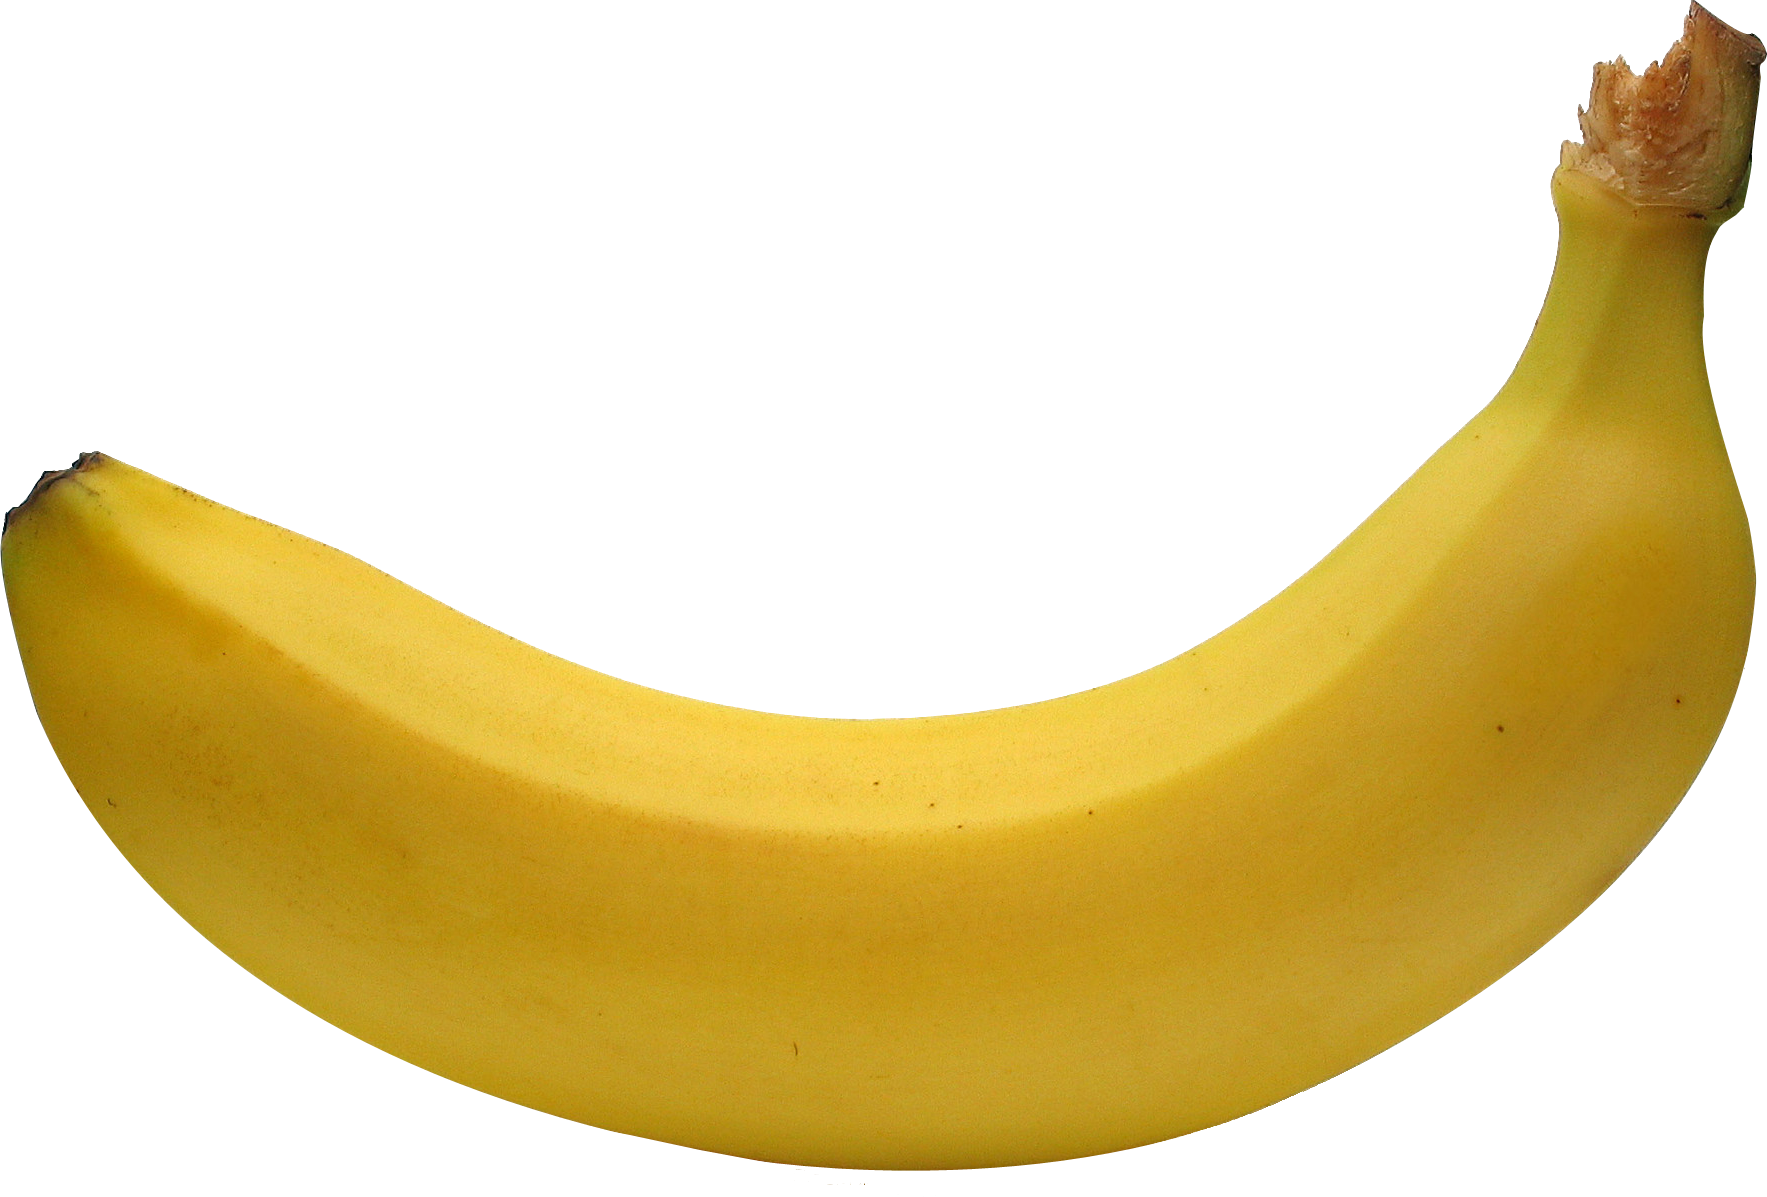 Images of Banana | 1767x1197